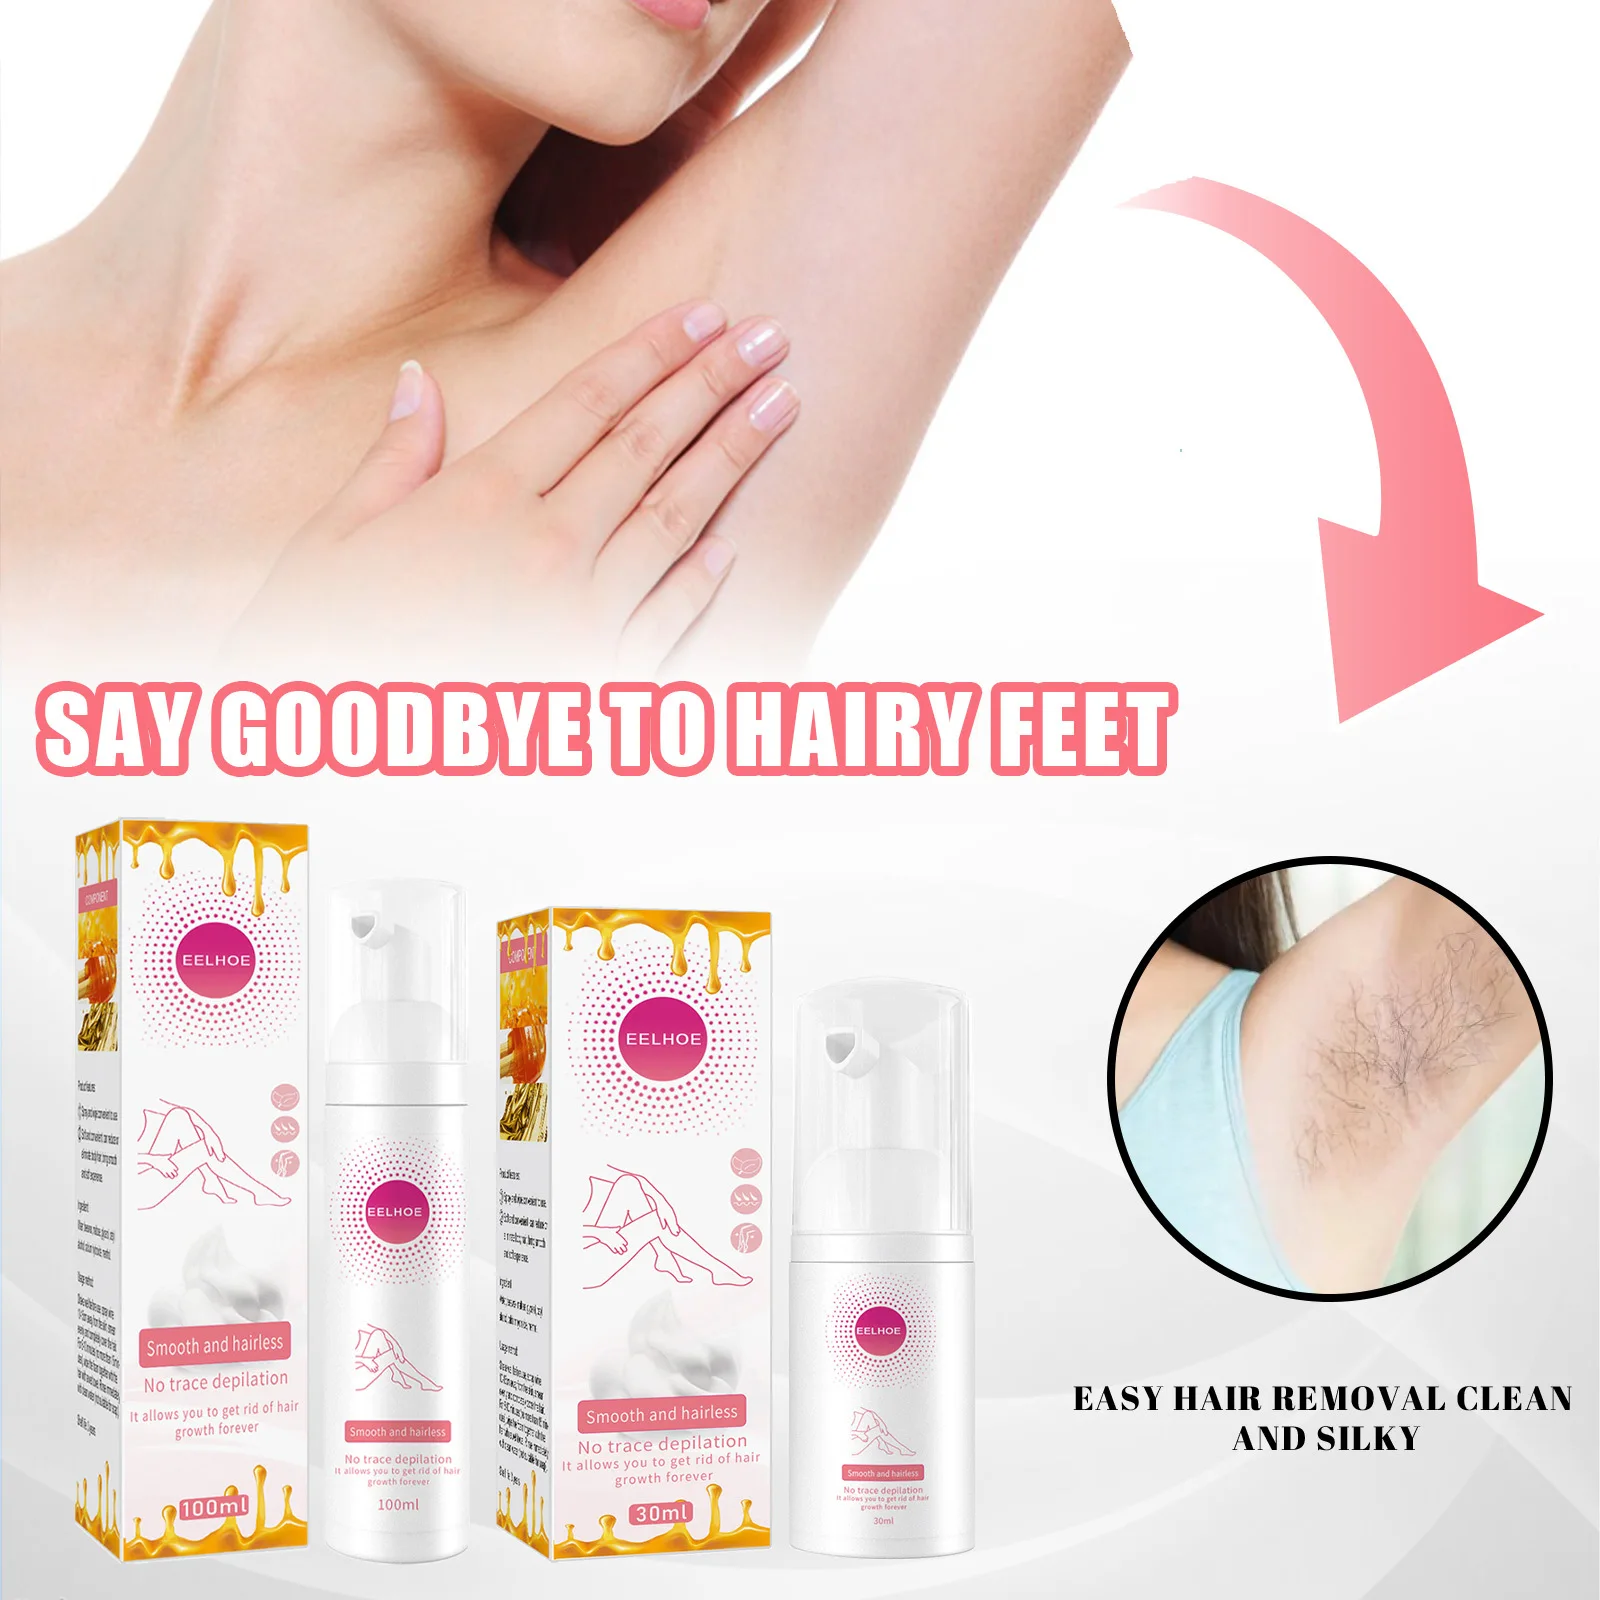 

Mousse Bottle Depilatory Armpit Hair And Legs Hair Removal Is Gentle And Non-irritating Mousse Foam Spray Hair Removal Cream Mak